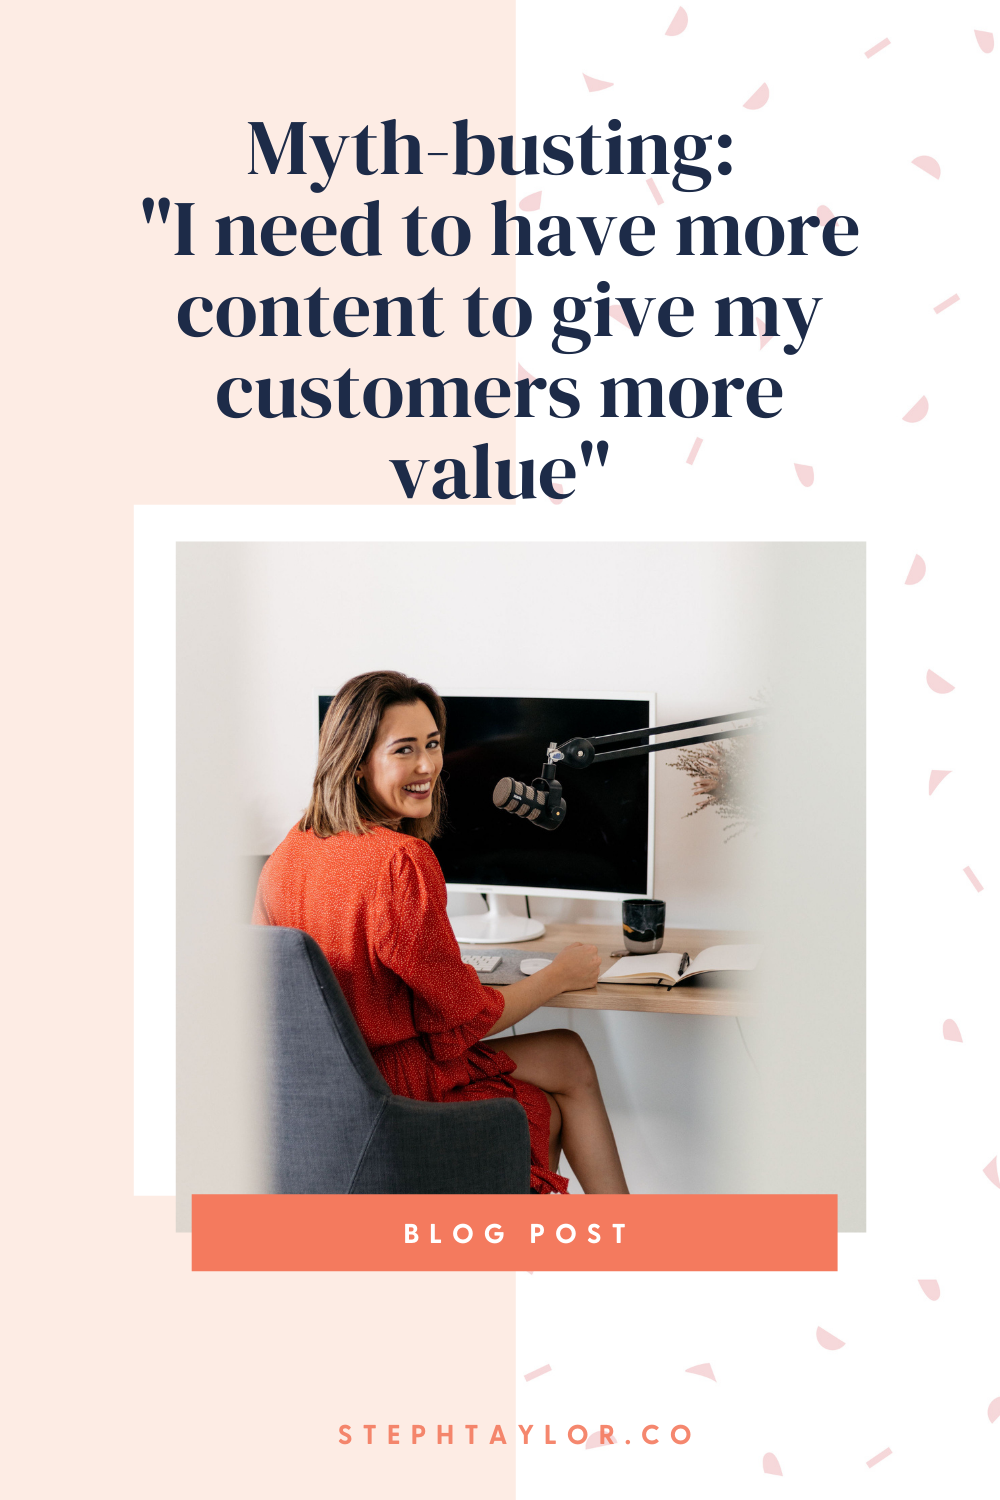 I need to have more content to give my customers more value